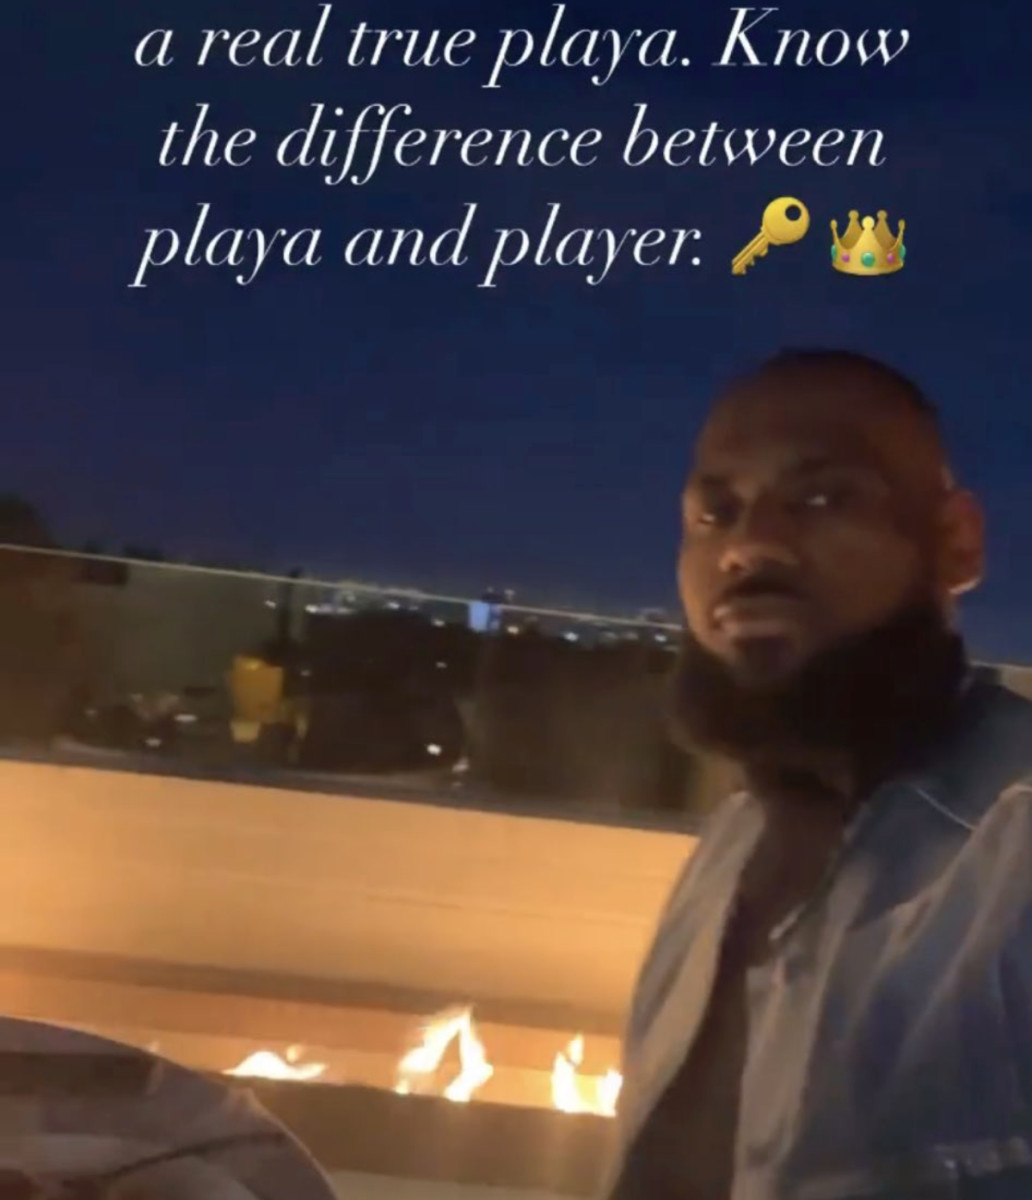 LeBron James Has A Dinner Date With Savannah James: "A Woman Will Always Love And Vibe With A Real True Playa. Know The Difference Between Playa And Player."